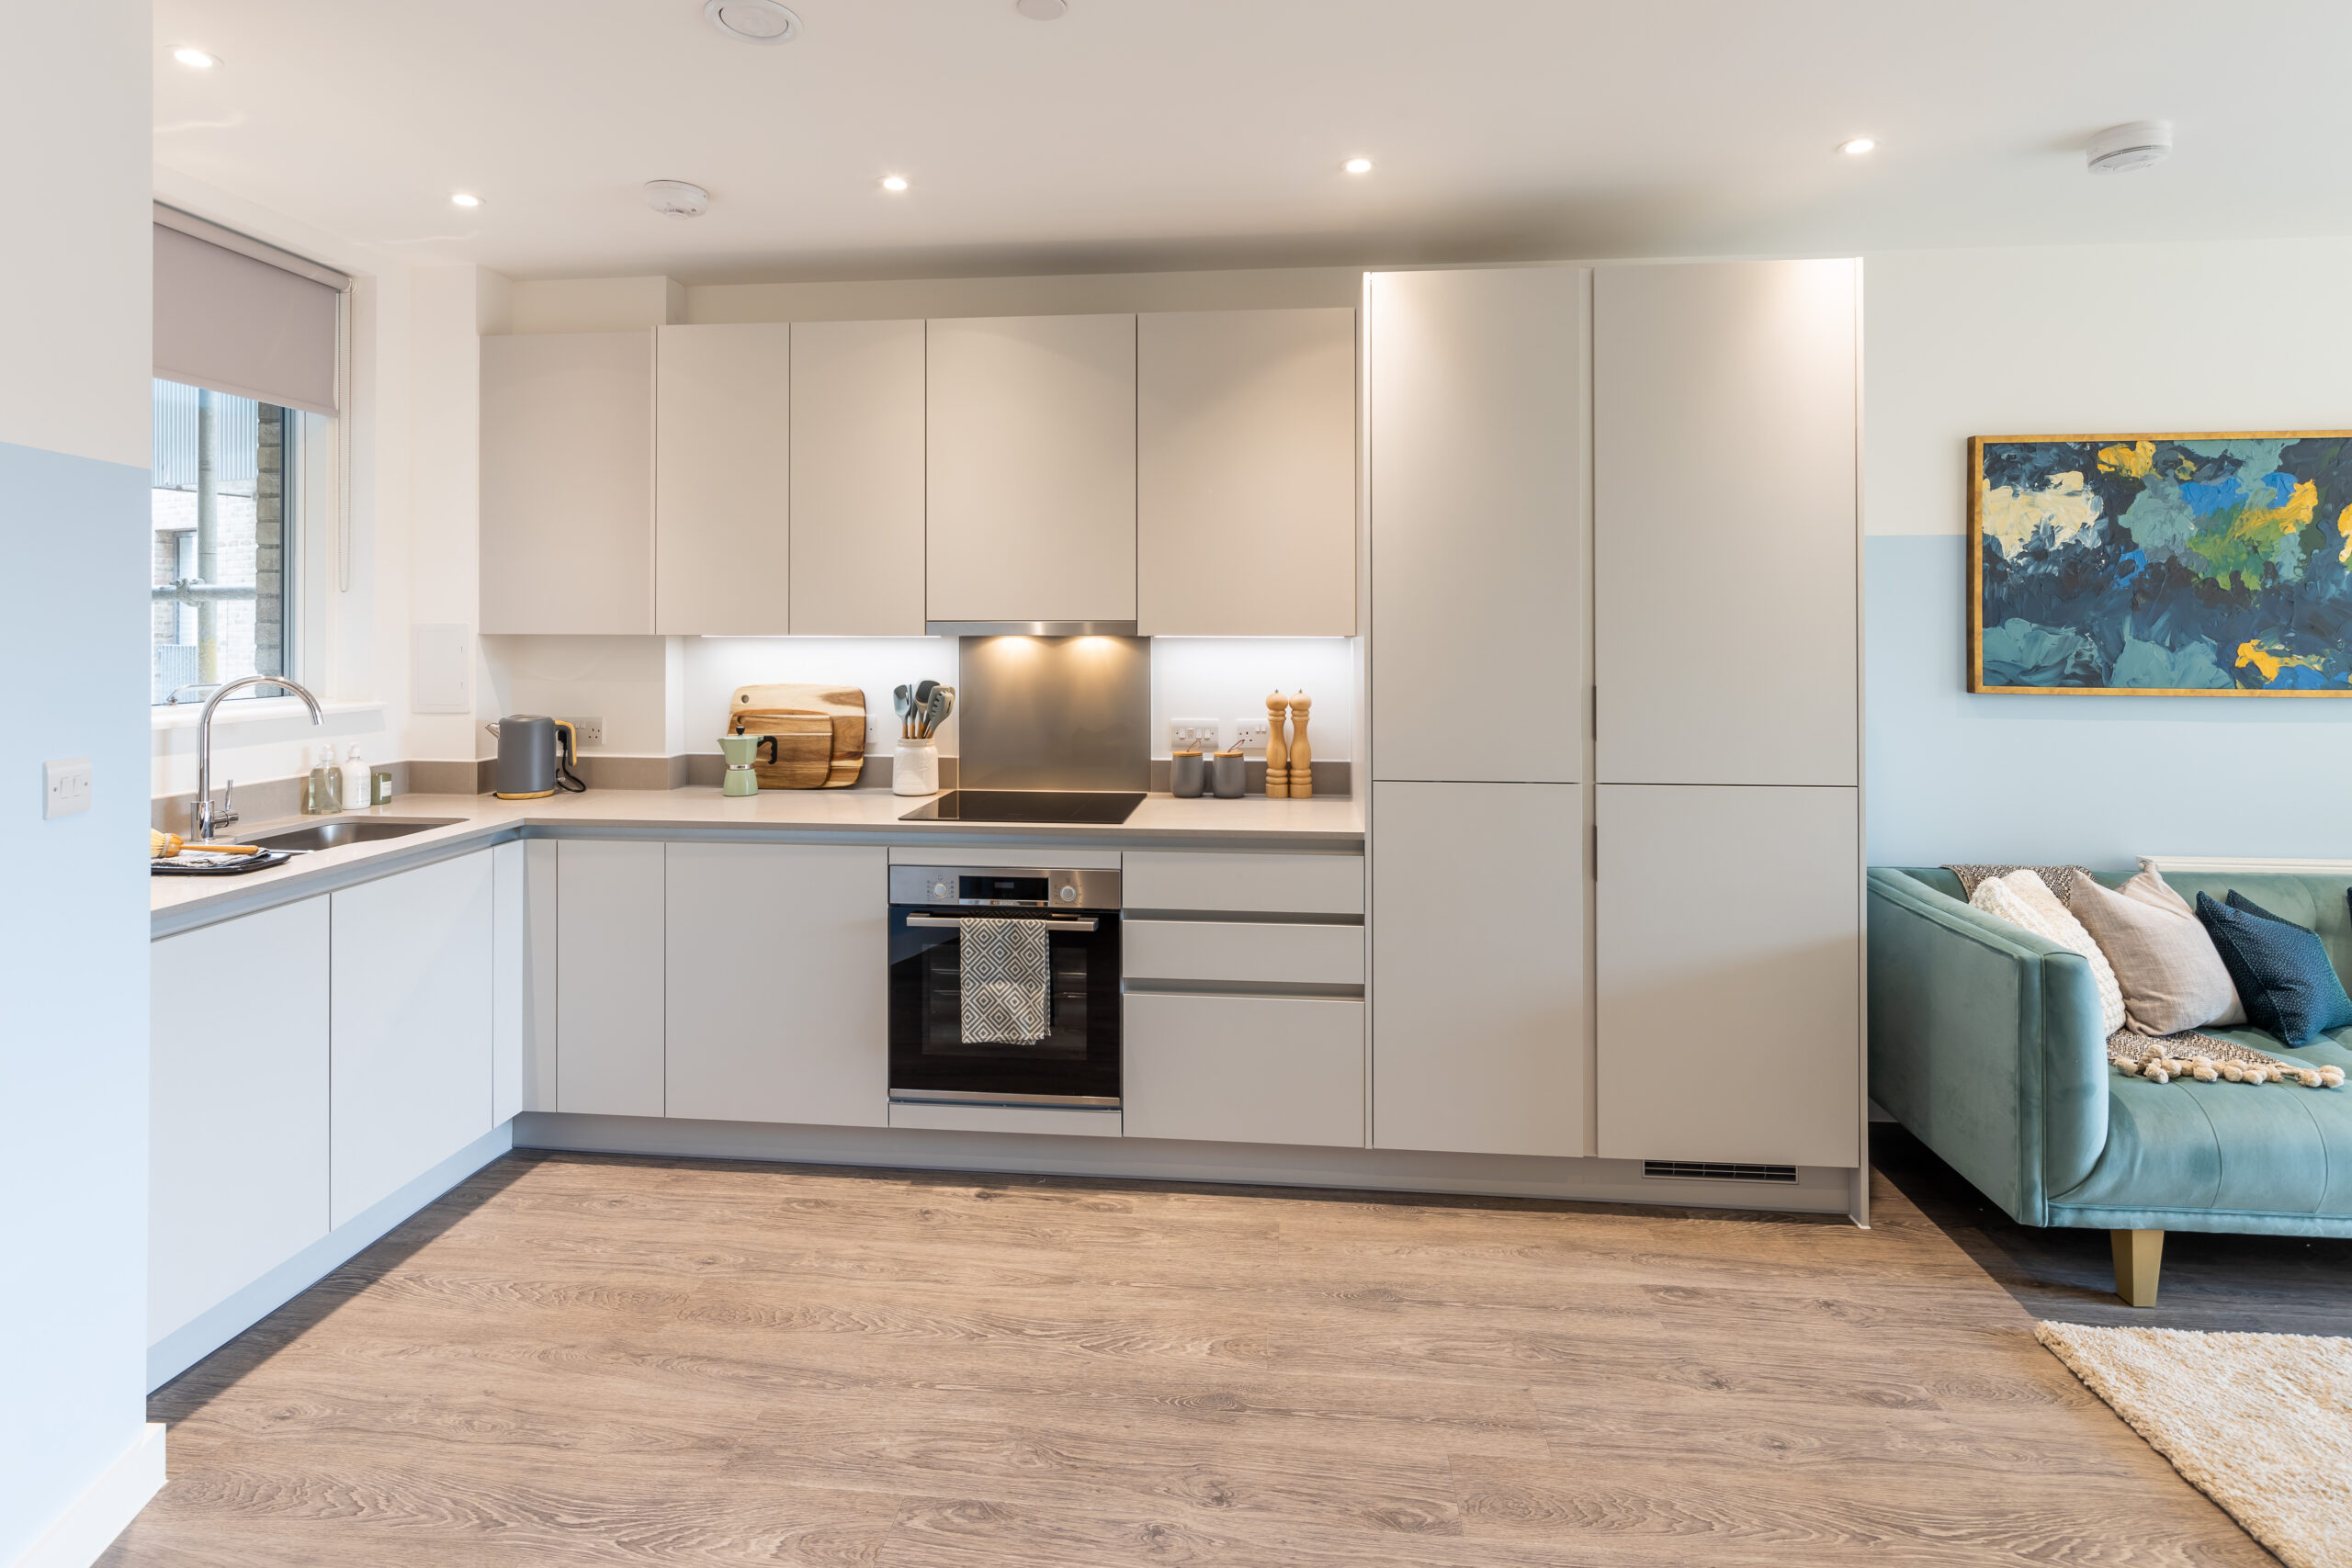 Kitchen3-The-Moorings-Hounslow-Brentford-Shared-Ownership-2021-Legal-And-General-Affordable-Homes